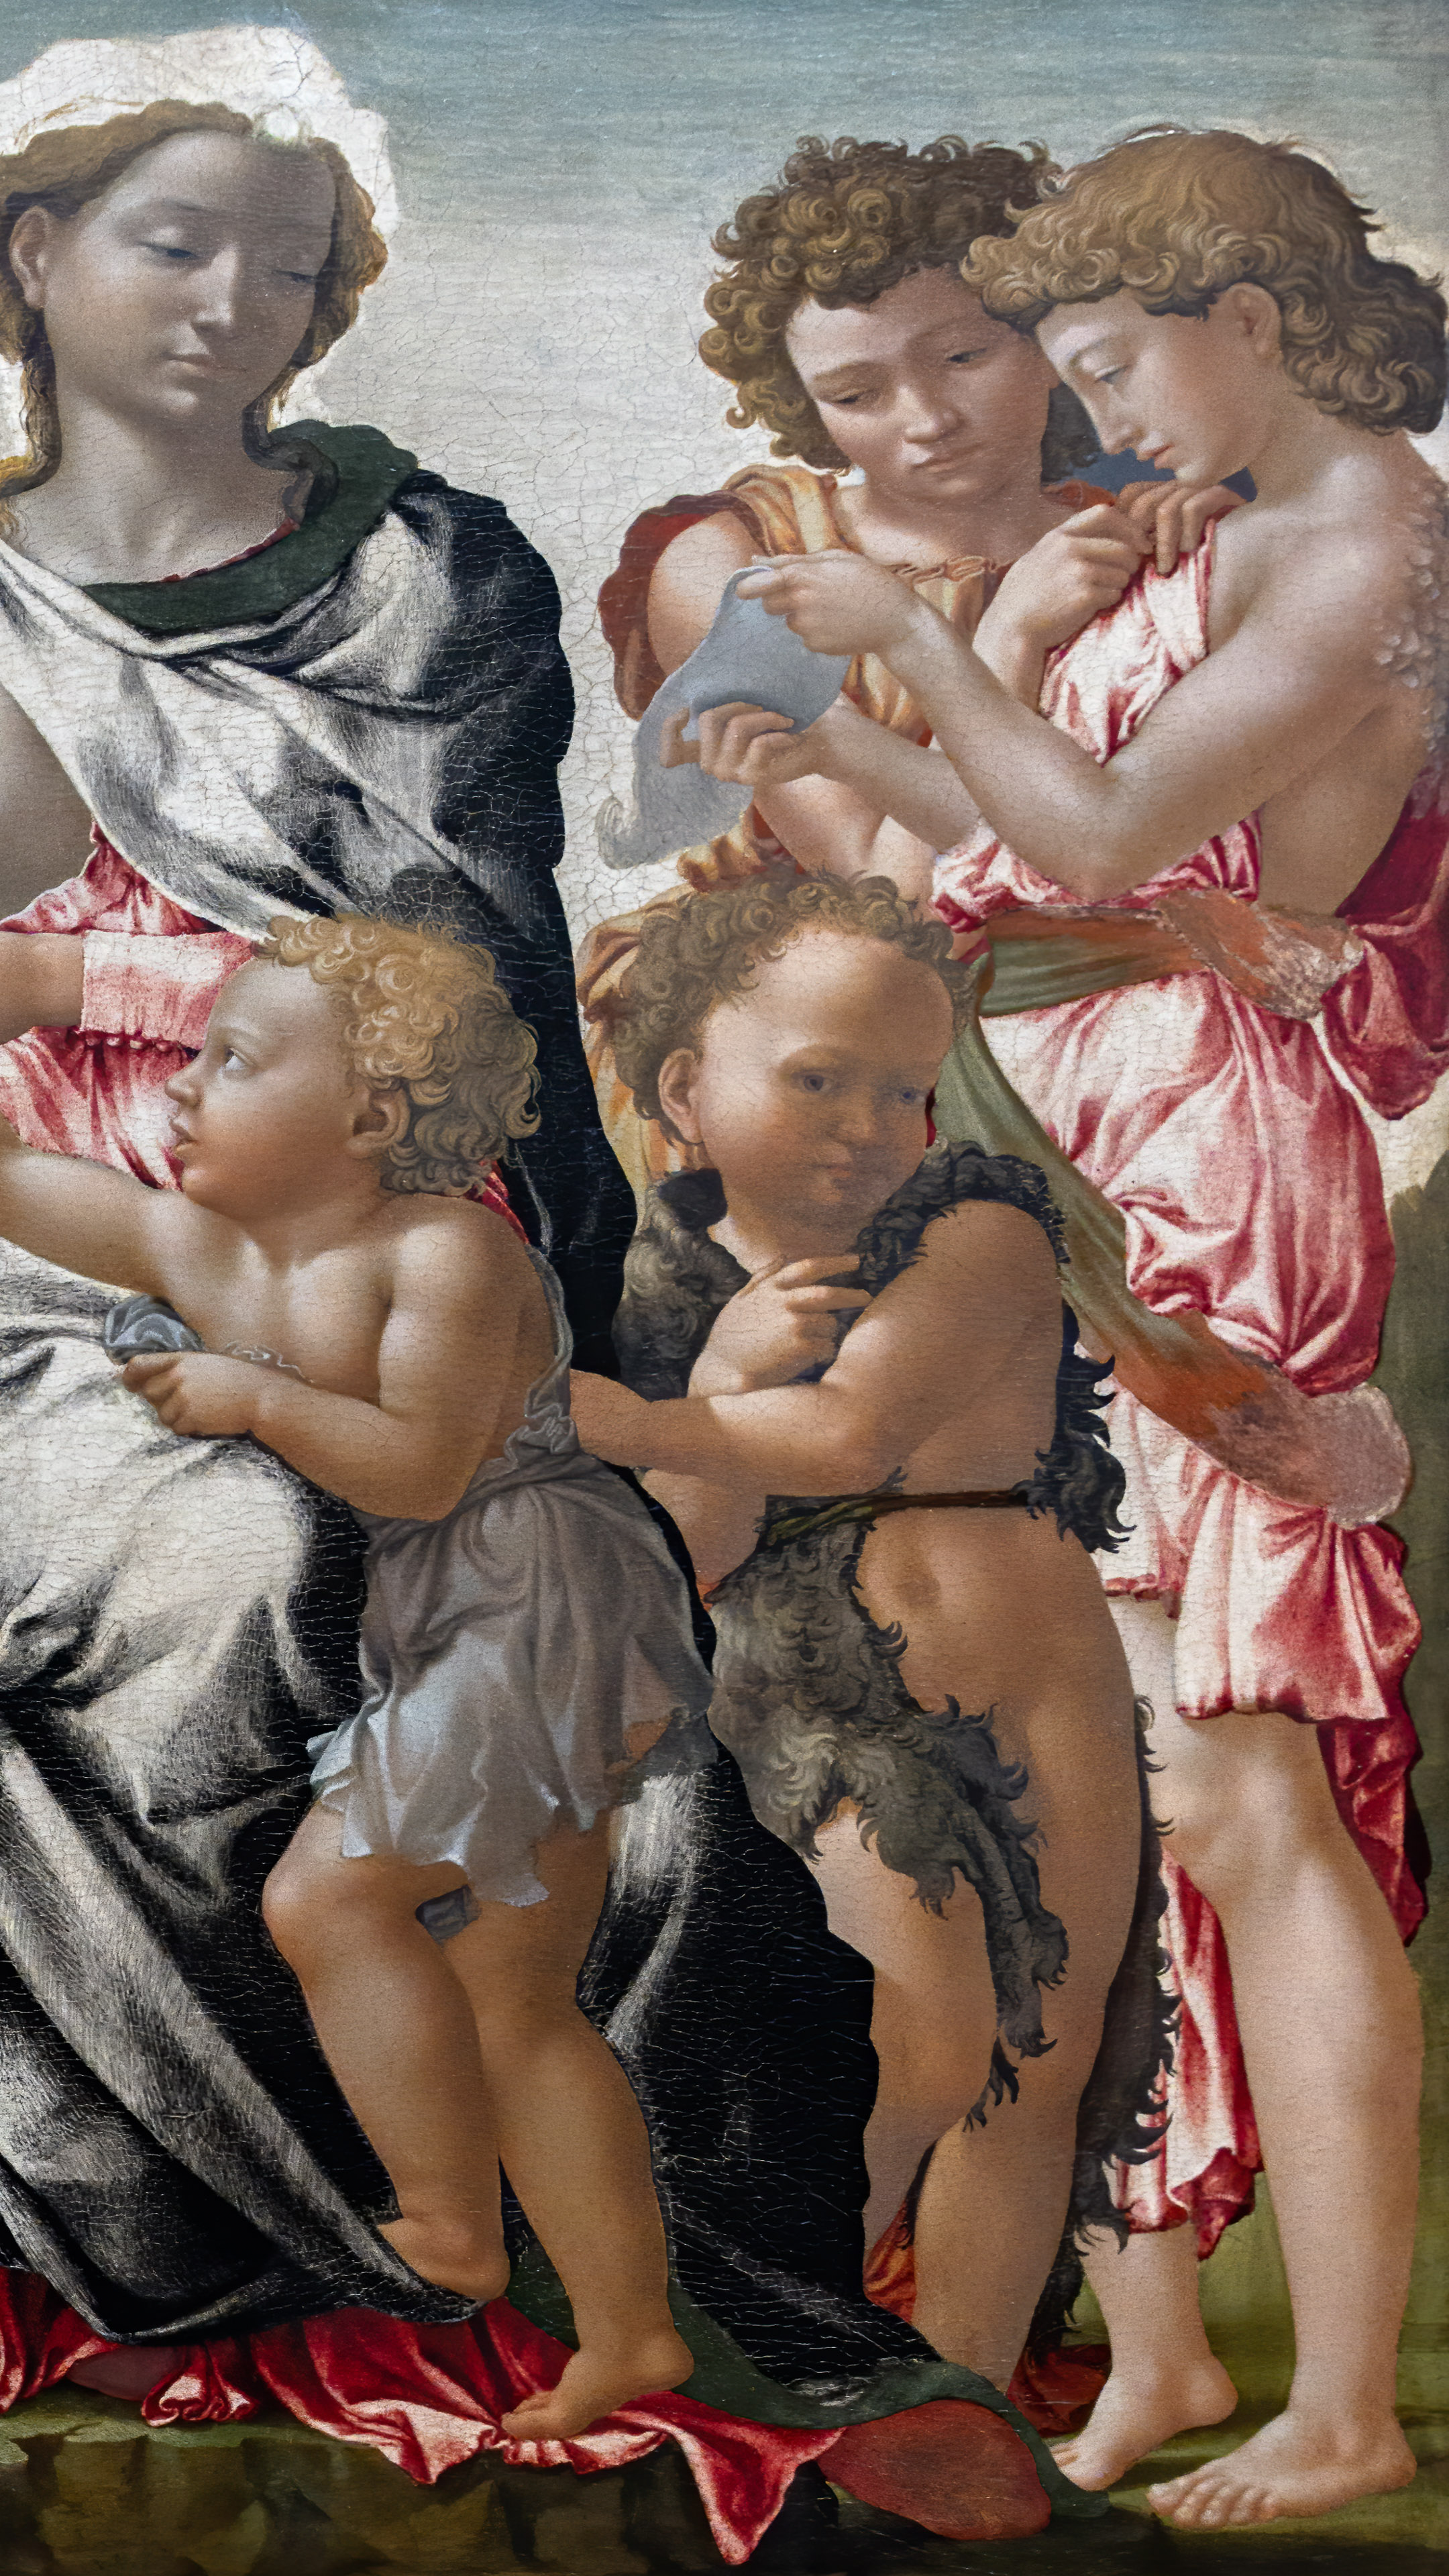 Michelangelo's timeless masterpieces now adorn your mobile screen in captivating HD resolution.